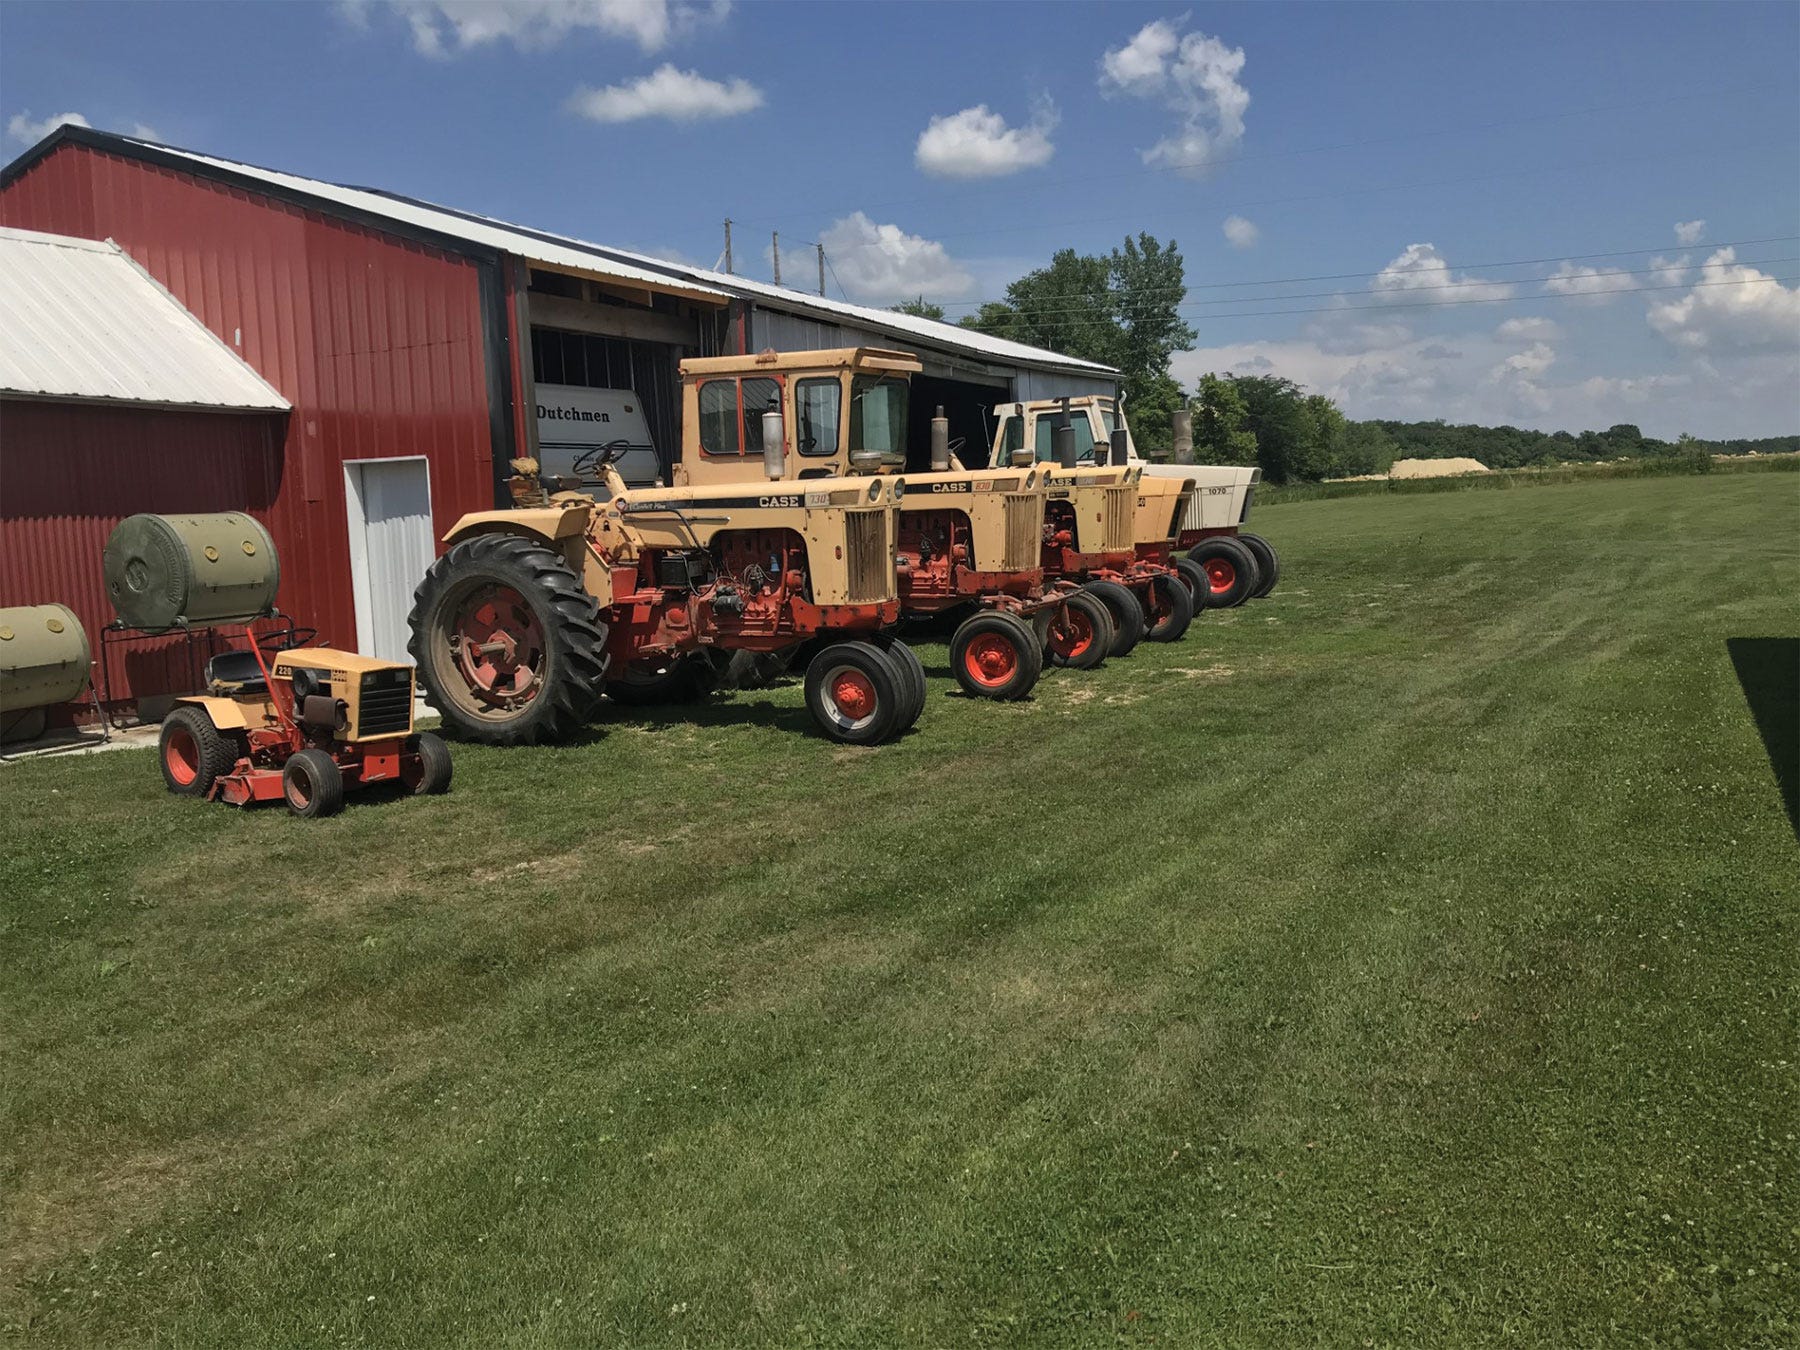 antique tractors lined up along a red shed